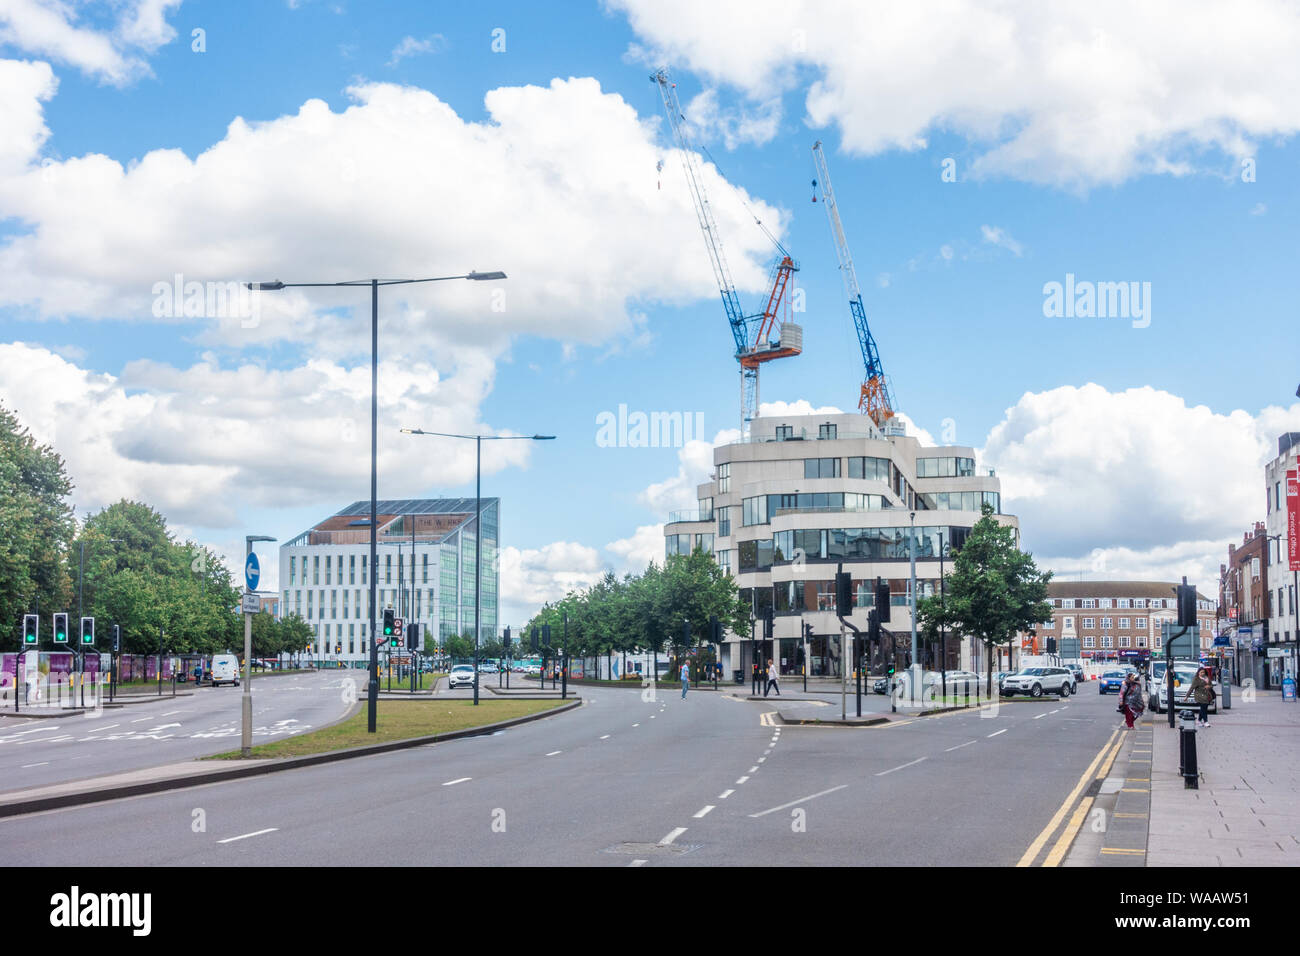 A view down the A4 towards Slough town centre. Large construction cranes point to the sky as part of redevelopment work going on in Slough. Stock Photo